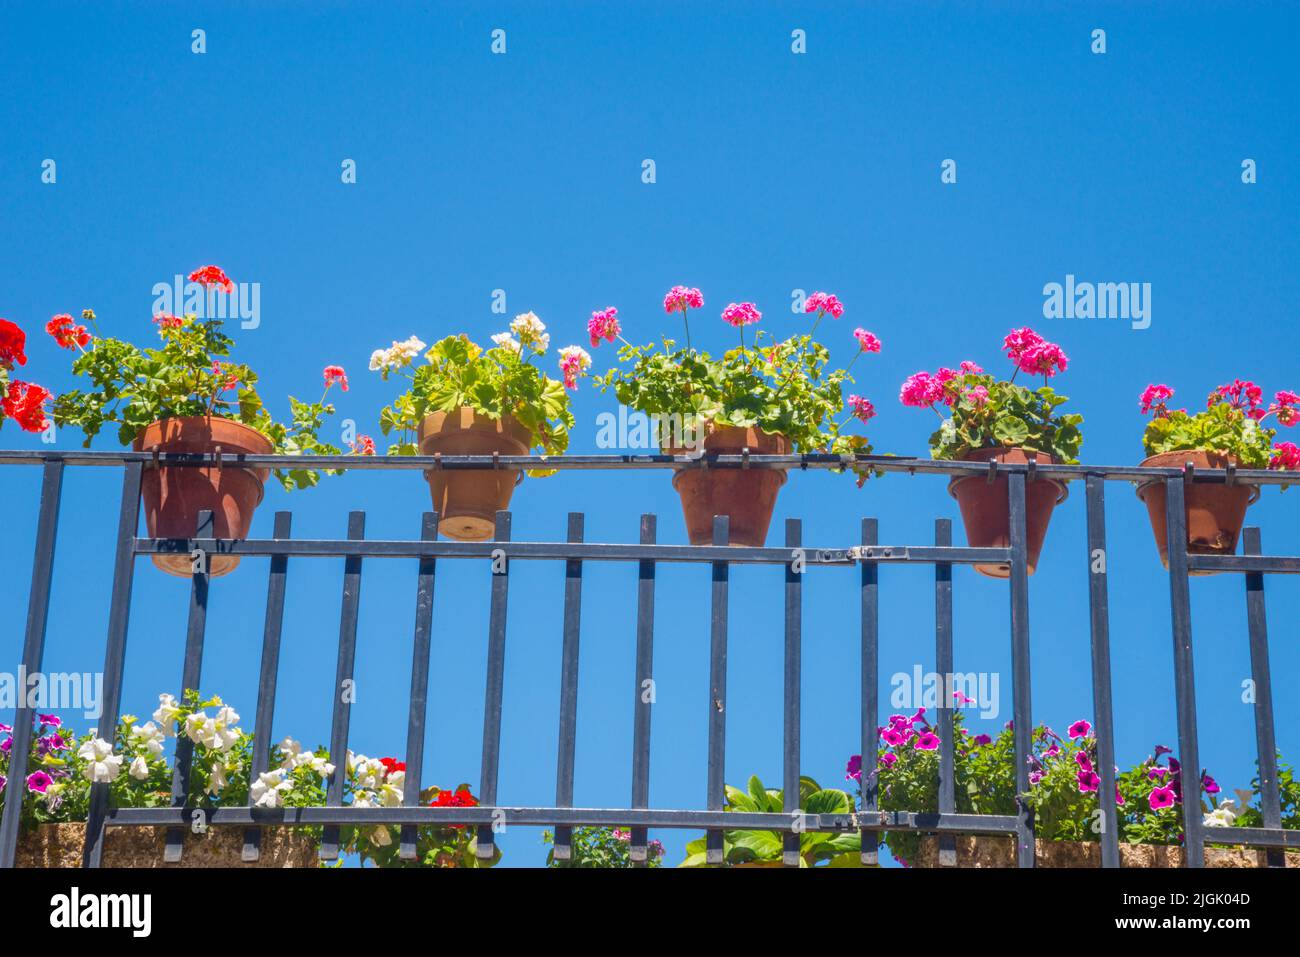 Flowerpots in a banister. Stock Photo